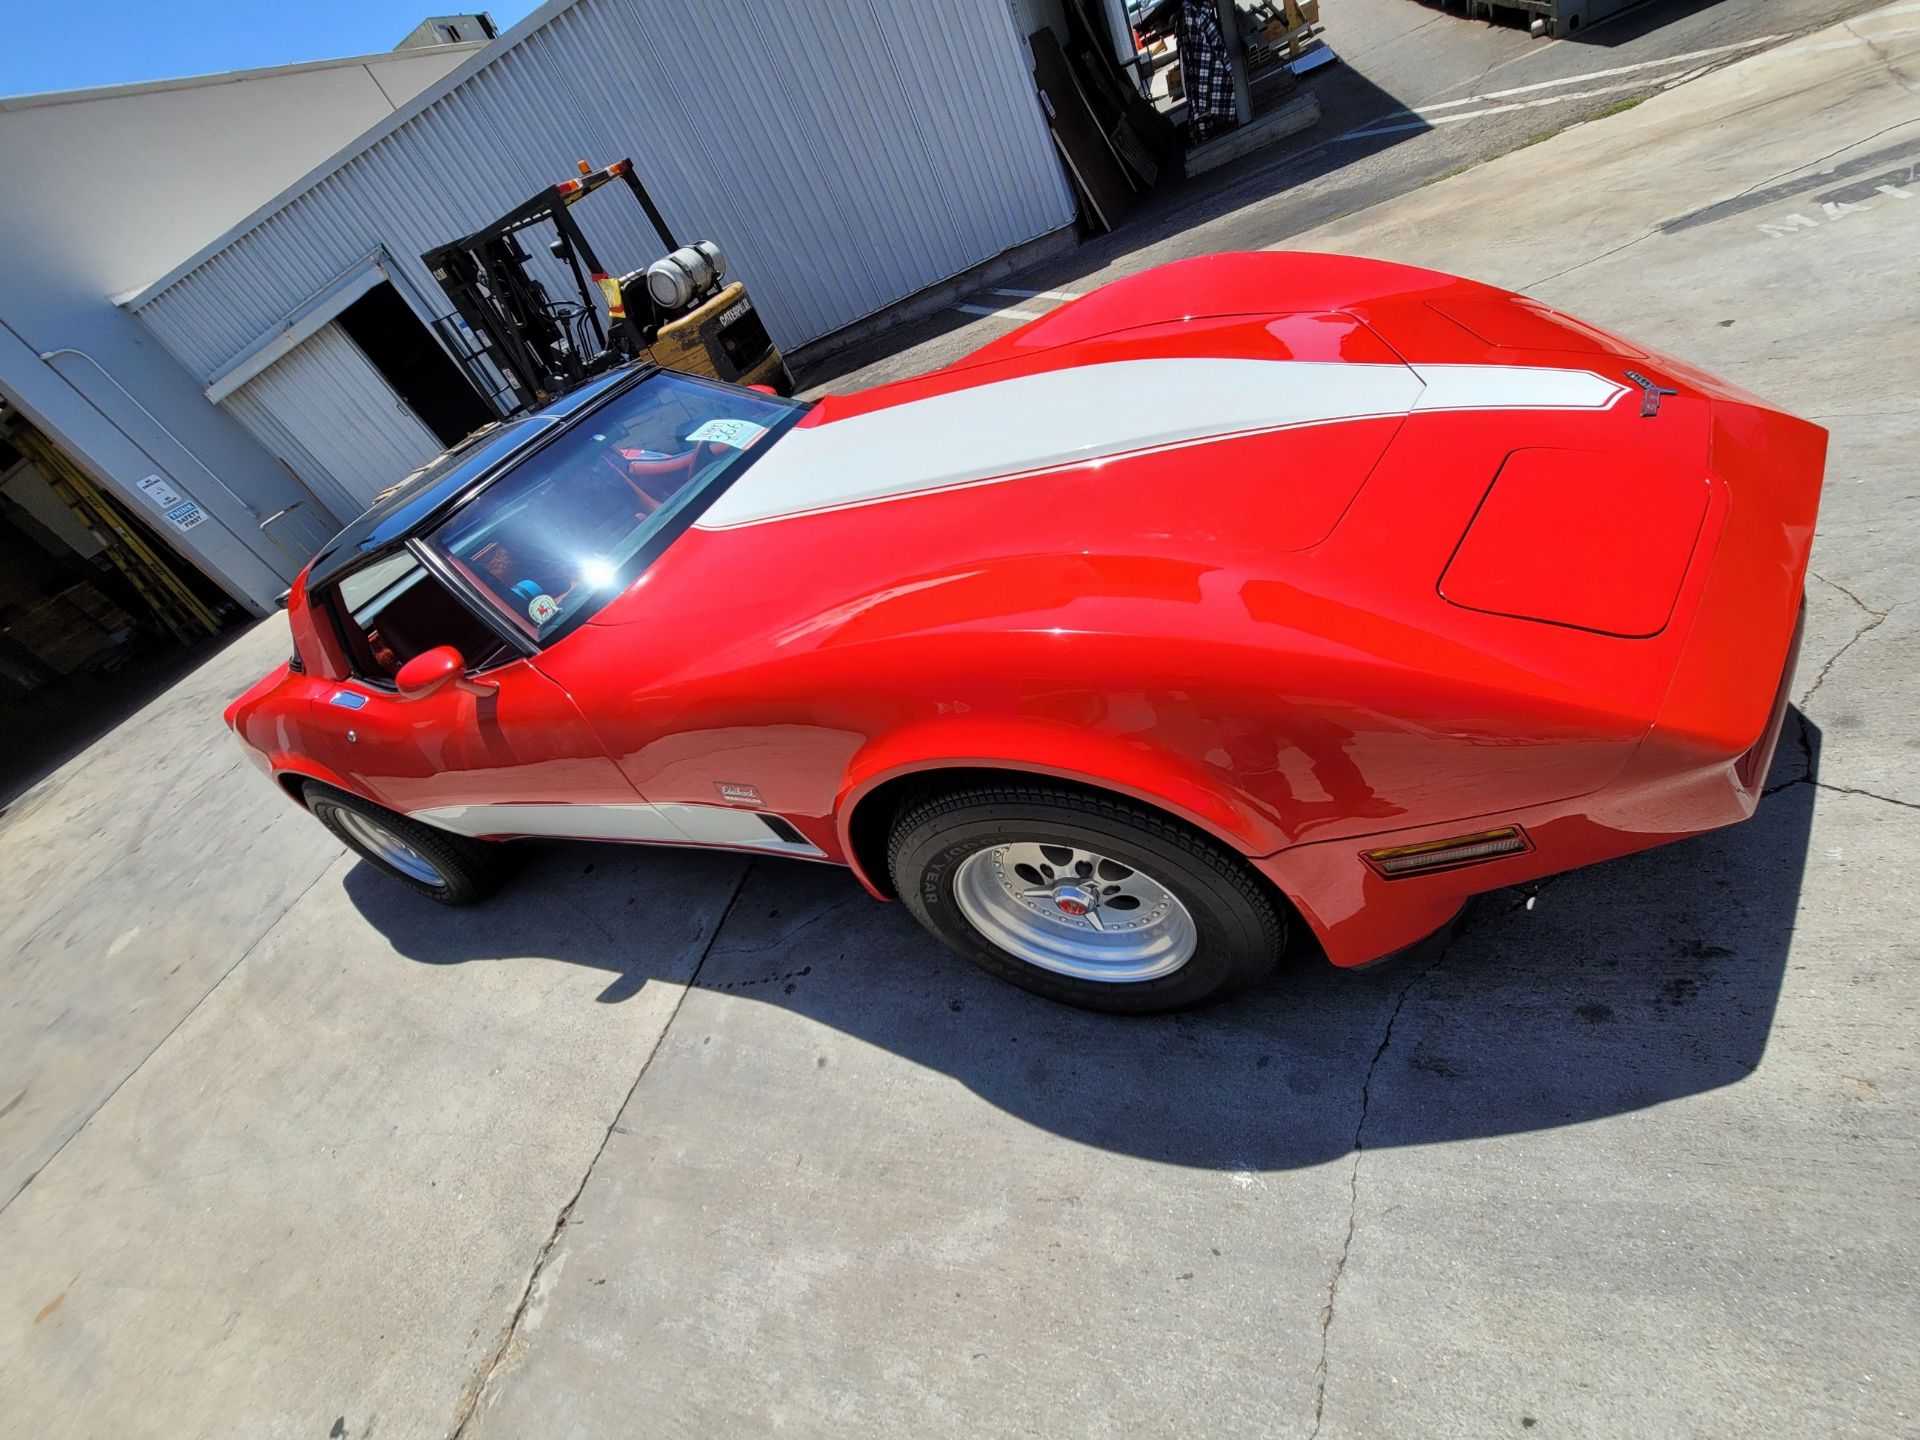 1980 CHEVROLET CORVETTE, WAS VIC EDELBROCK'S PERSONAL CAR BOUGHT FOR R&D, RED INTERIOR, TITLE ONLY. - Image 63 of 70